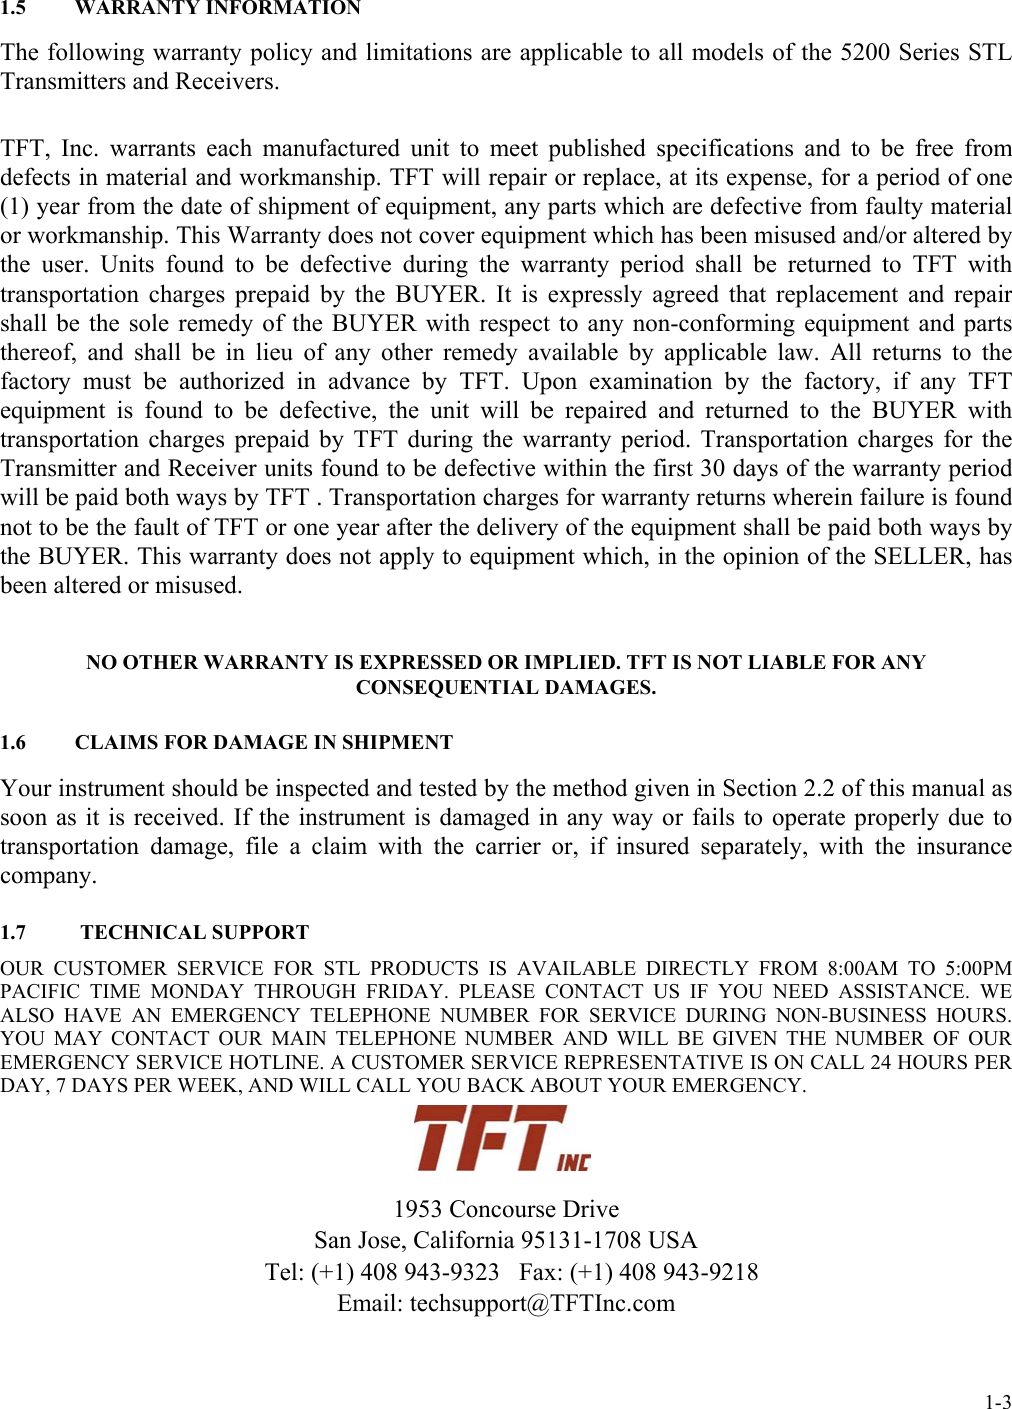 1.5   WARRANTY INFORMATION The following warranty policy and limitations are applicable to all models of the 5200 Series STL Transmitters and Receivers. TFT, Inc. warrants each manufactured unit to meet published specifications and to be free from defects in material and workmanship. TFT will repair or replace, at its expense, for a period of one (1) year from the date of shipment of equipment, any parts which are defective from faulty material or workmanship. This Warranty does not cover equipment which has been misused and/or altered by the user. Units found to be defective during the warranty period shall be returned to TFT with transportation charges prepaid by the BUYER. It is expressly agreed that replacement and repair shall be the sole remedy of the BUYER with respect to any non-conforming equipment and parts thereof, and shall be in lieu of any other remedy available by applicable law. All returns to the factory must be authorized in advance by TFT. Upon examination by the factory, if any TFT equipment is found to be defective, the unit will be repaired and returned to the BUYER with transportation charges prepaid by TFT during the warranty period. Transportation charges for the Transmitter and Receiver units found to be defective within the first 30 days of the warranty period will be paid both ways by TFT . Transportation charges for warranty returns wherein failure is found not to be the fault of TFT or one year after the delivery of the equipment shall be paid both ways by the BUYER. This warranty does not apply to equipment which, in the opinion of the SELLER, has been altered or misused. NO OTHER WARRANTY IS EXPRESSED OR IMPLIED. TFT IS NOT LIABLE FOR ANY CONSEQUENTIAL DAMAGES. 1.6   CLAIMS FOR DAMAGE IN SHIPMENT Your instrument should be inspected and tested by the method given in Section 2.2 of this manual as soon as it is received. If the instrument is damaged in any way or fails to operate properly due to transportation damage, file a claim with the carrier or, if insured separately, with the insurance company. 1.7   TECHNICAL SUPPORT OUR CUSTOMER SERVICE FOR STL PRODUCTS IS AVAILABLE DIRECTLY FROM 8:00AM TO 5:00PM PACIFIC TIME MONDAY THROUGH FRIDAY. PLEASE CONTACT US IF YOU NEED ASSISTANCE. WE ALSO HAVE AN EMERGENCY TELEPHONE NUMBER FOR SERVICE DURING NON-BUSINESS HOURS. YOU MAY CONTACT OUR MAIN TELEPHONE NUMBER AND WILL BE GIVEN THE NUMBER OF OUR EMERGENCY SERVICE HOTLINE. A CUSTOMER SERVICE REPRESENTATIVE IS ON CALL 24 HOURS PER DAY, 7 DAYS PER WEEK, AND WILL CALL YOU BACK ABOUT YOUR EMERGENCY.    1953 Concourse Drive San Jose, California 95131-1708 USA   Tel: (+1) 408 943-9323   Fax: (+1) 408 943-9218 Email: techsupport@TFTInc.com  1-3